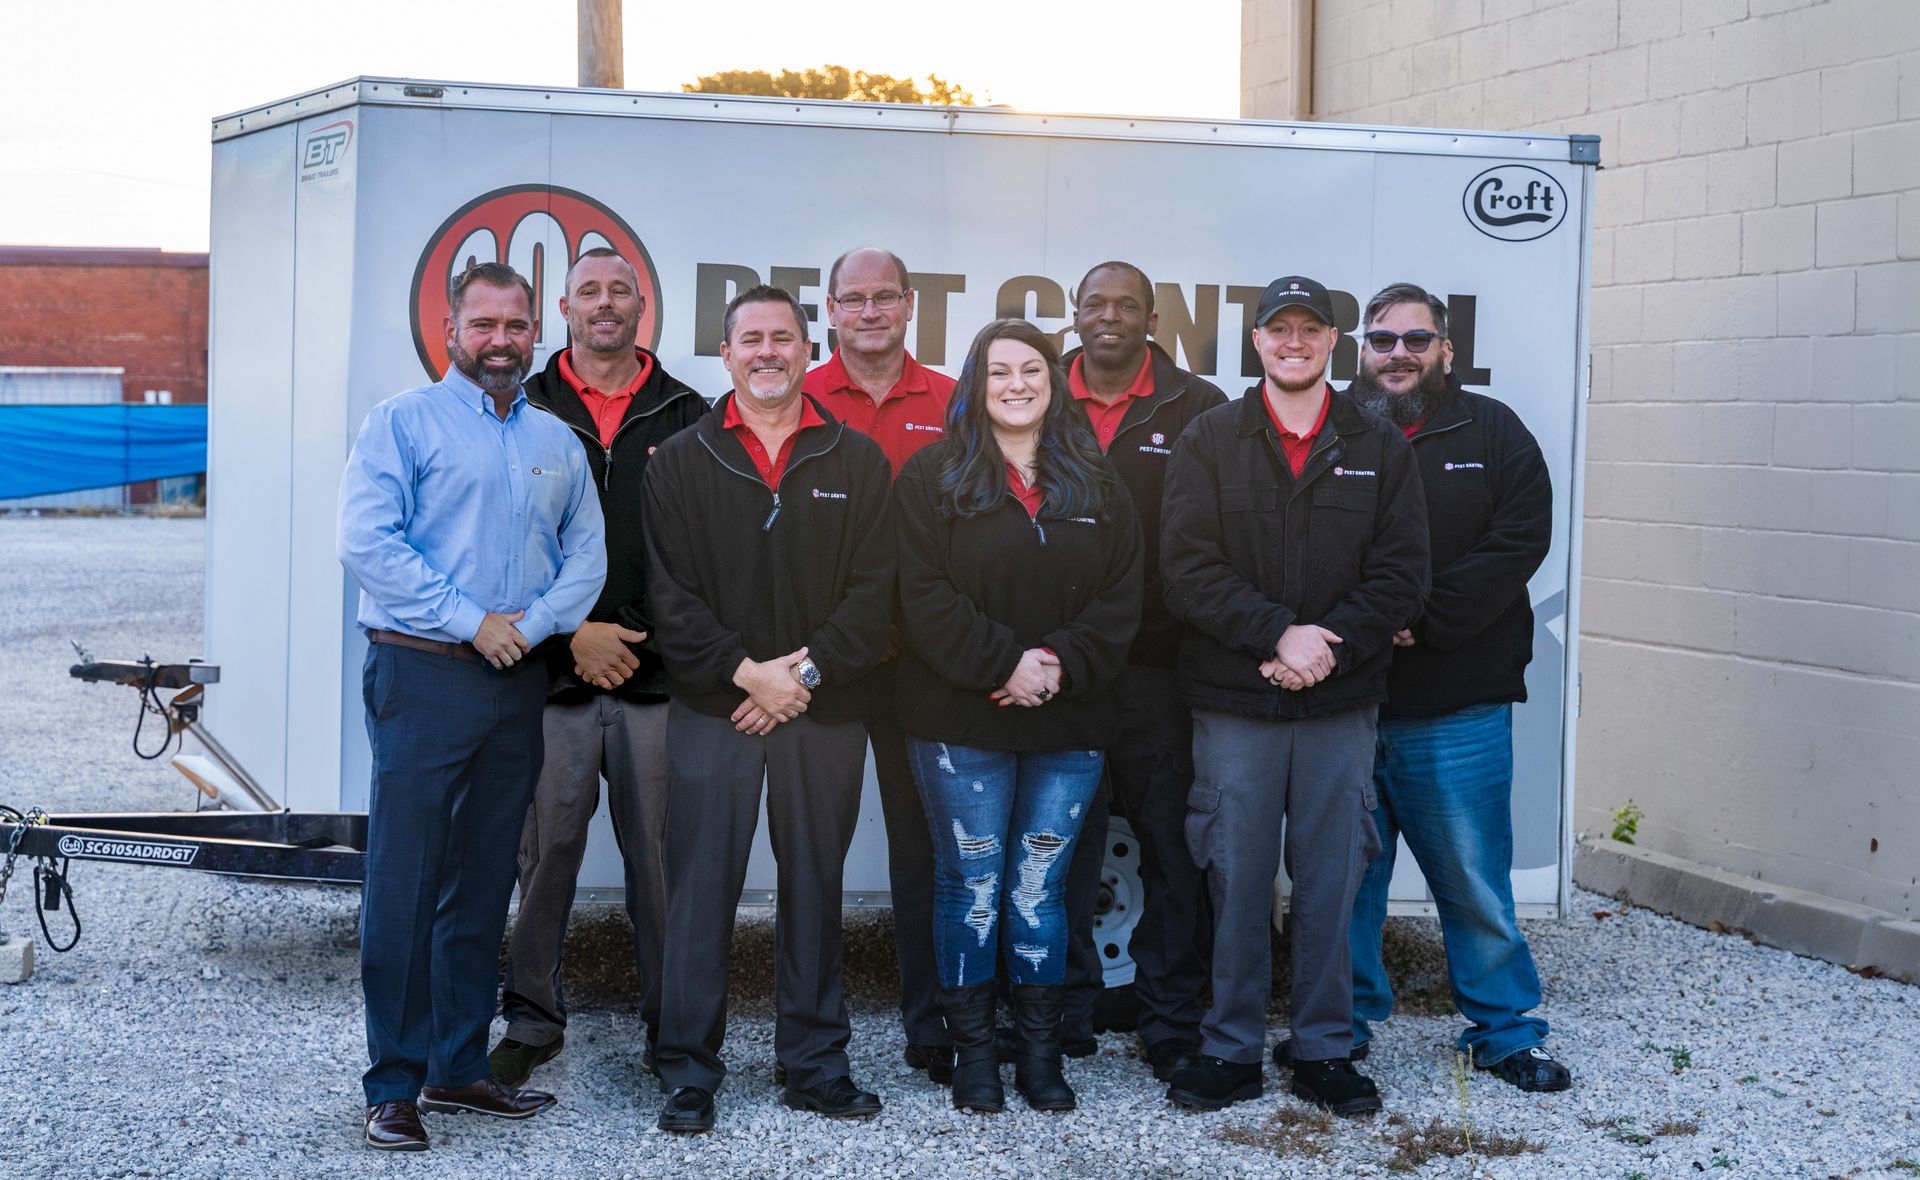 This is the team of pest control technicians and staff the make SOS Pest Control one of the best bedbug exterminators in the Kansas City area.